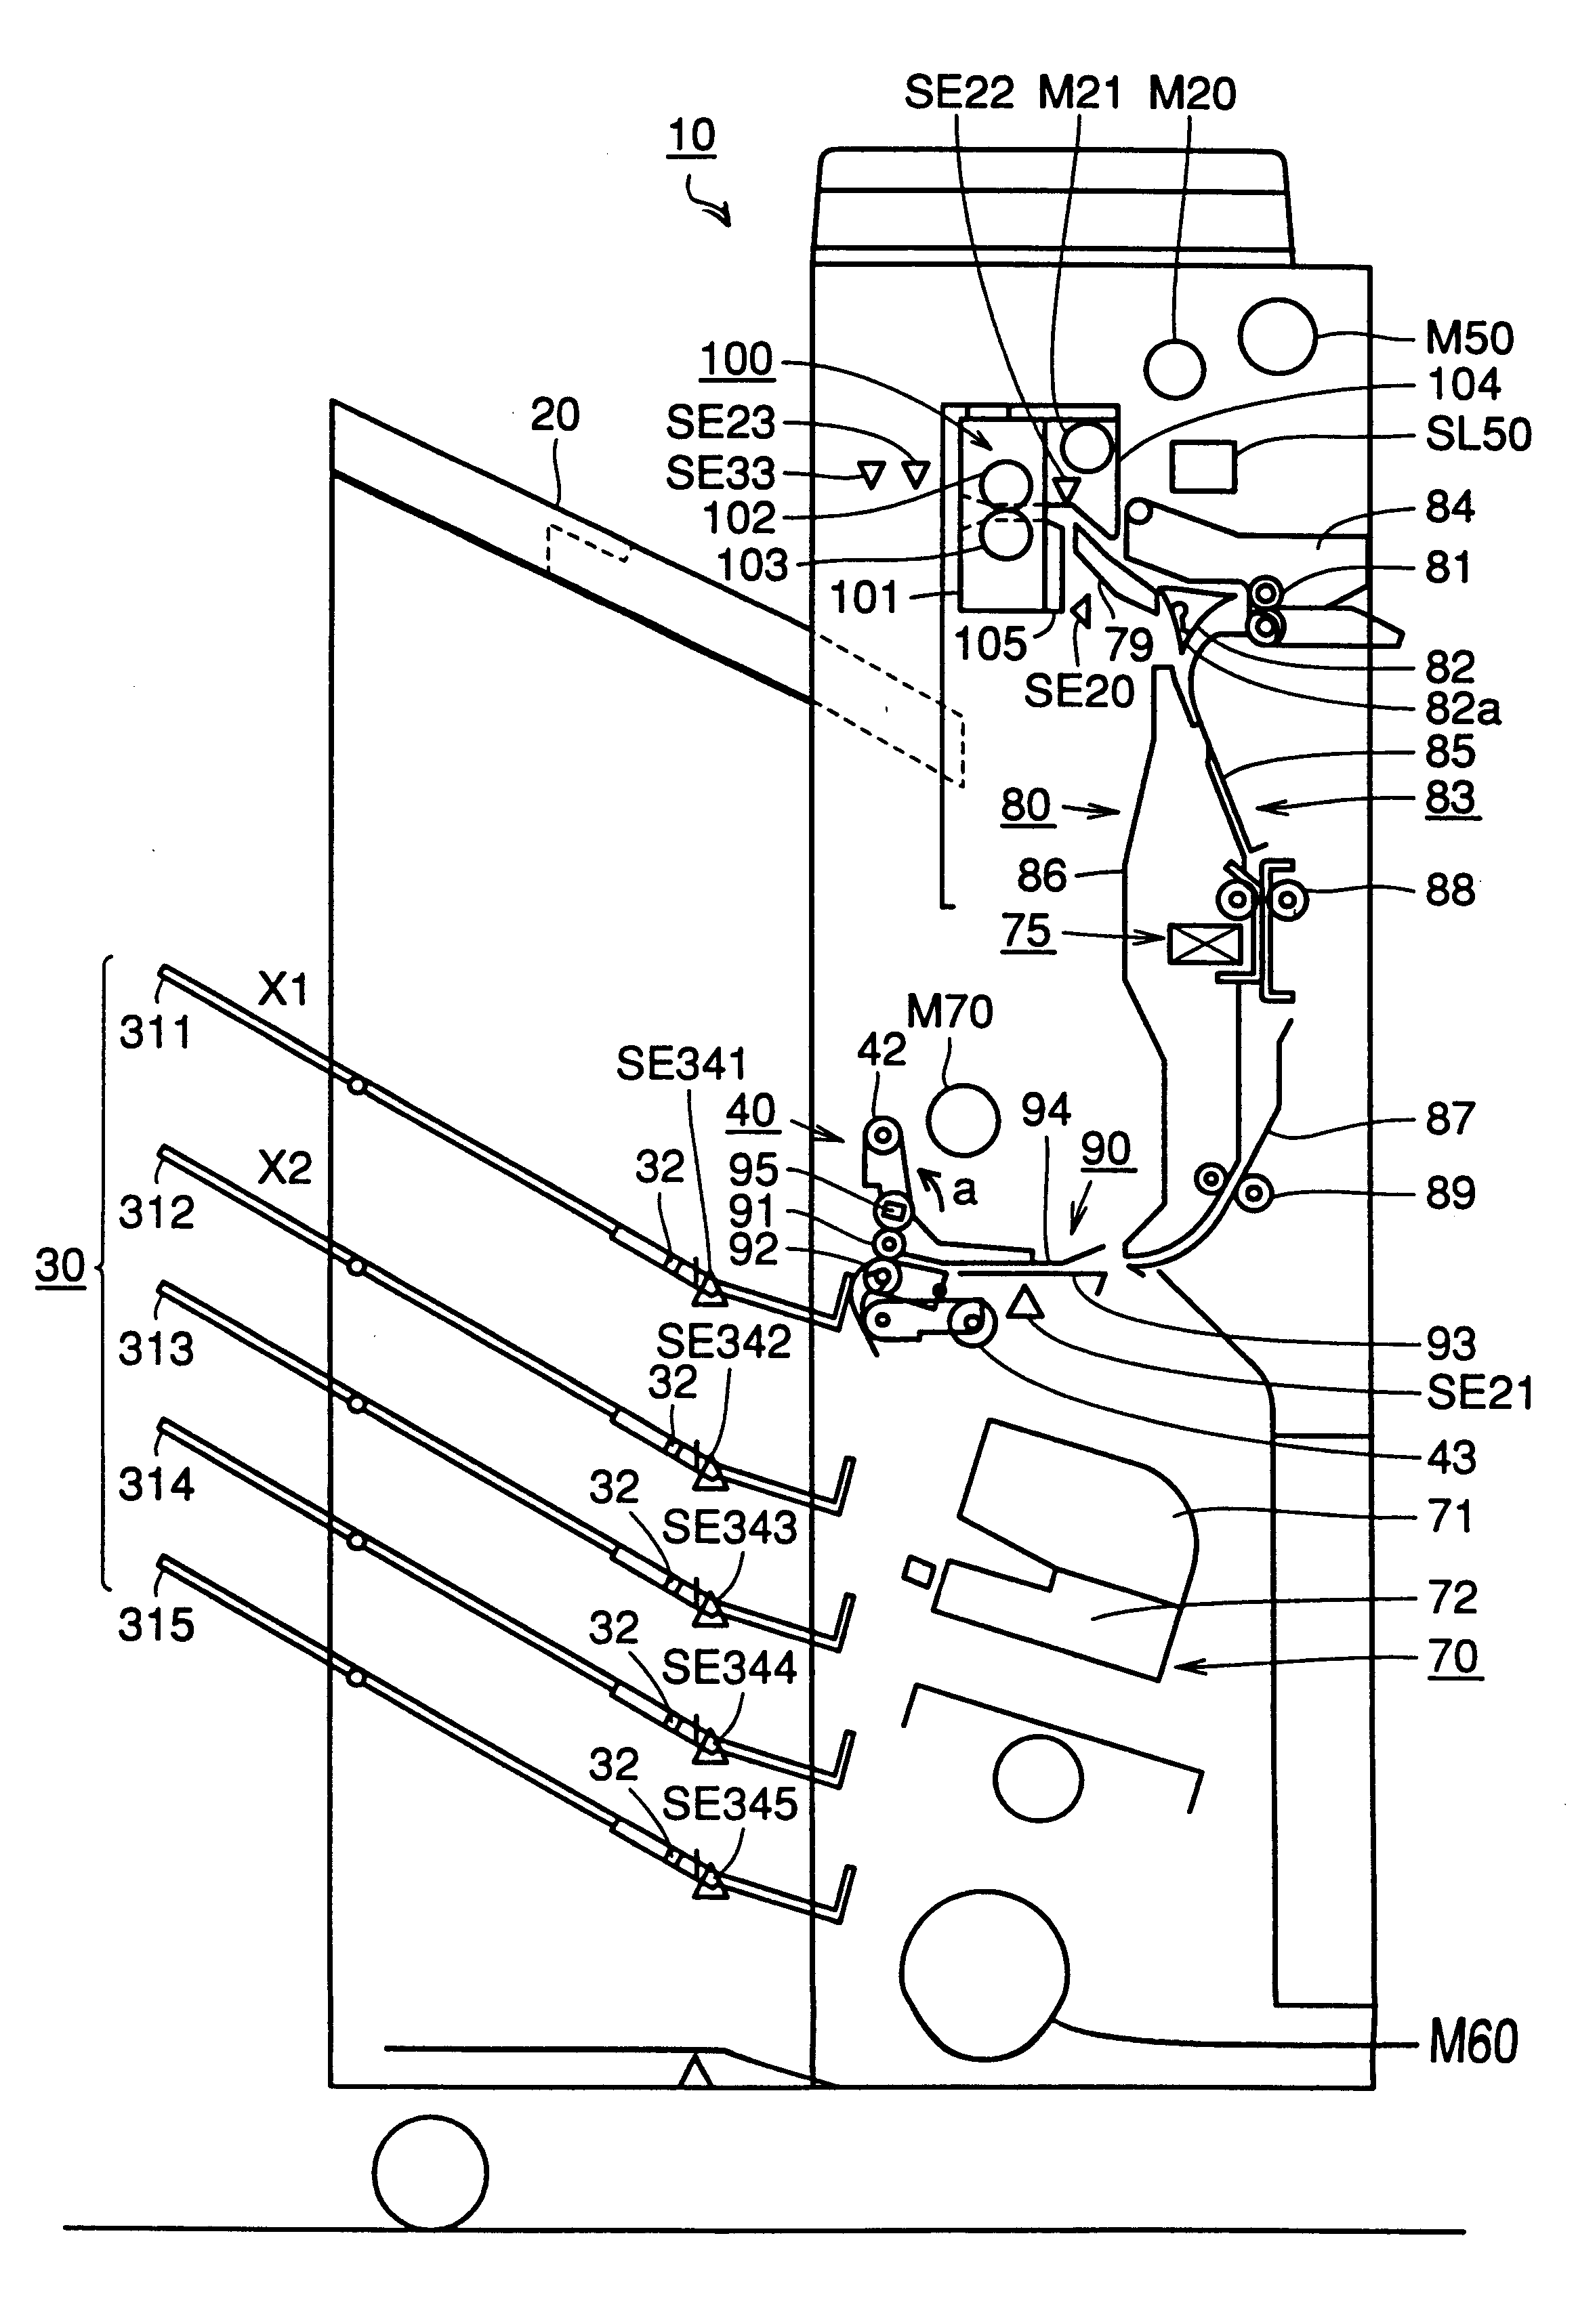 Image forming apparatus with highly operable sheet discharge device